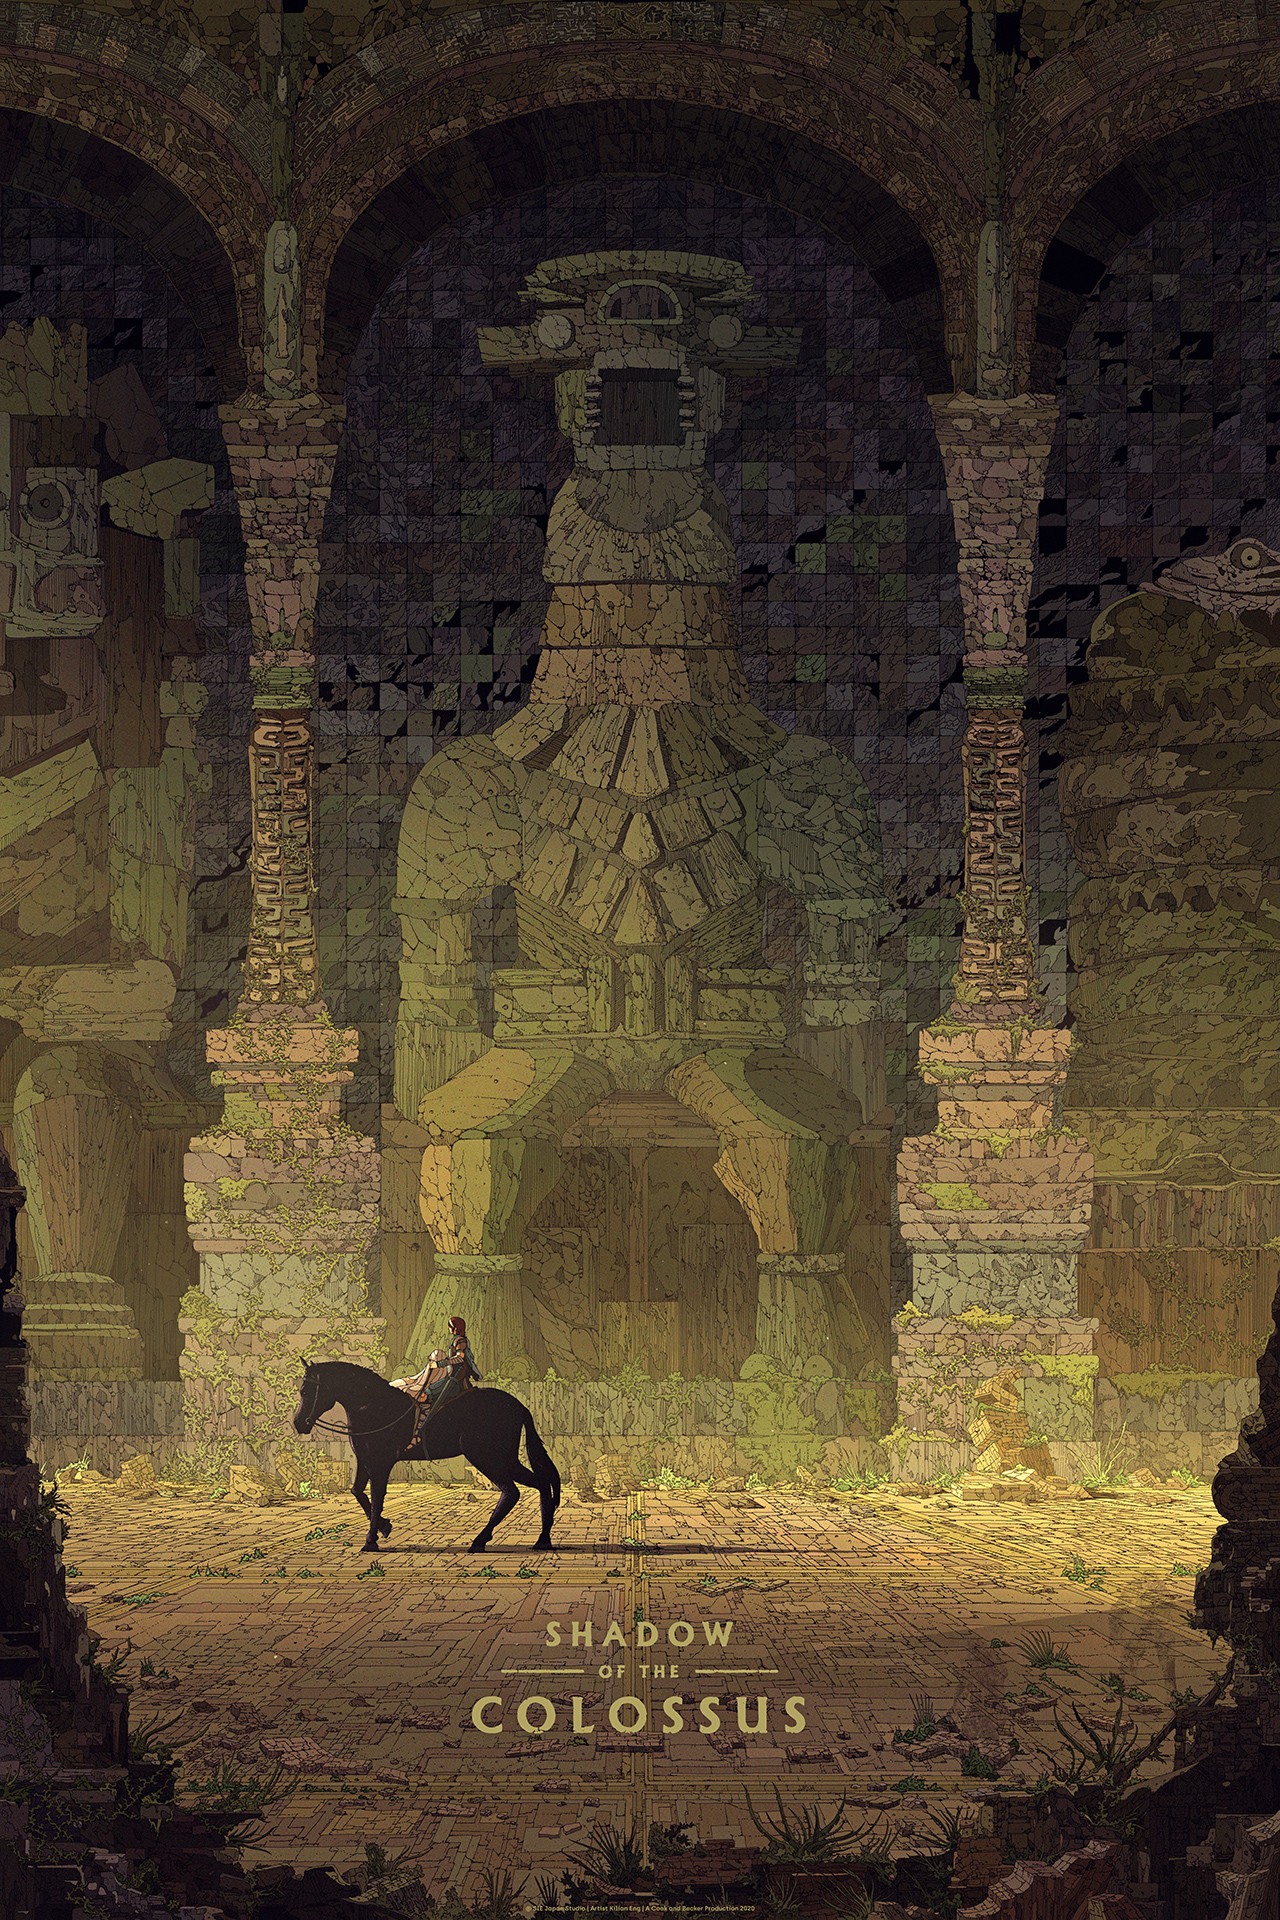 Shadow Of The Colossus Posters Online - Shop Unique Metal Prints, Pictures,  Paintings